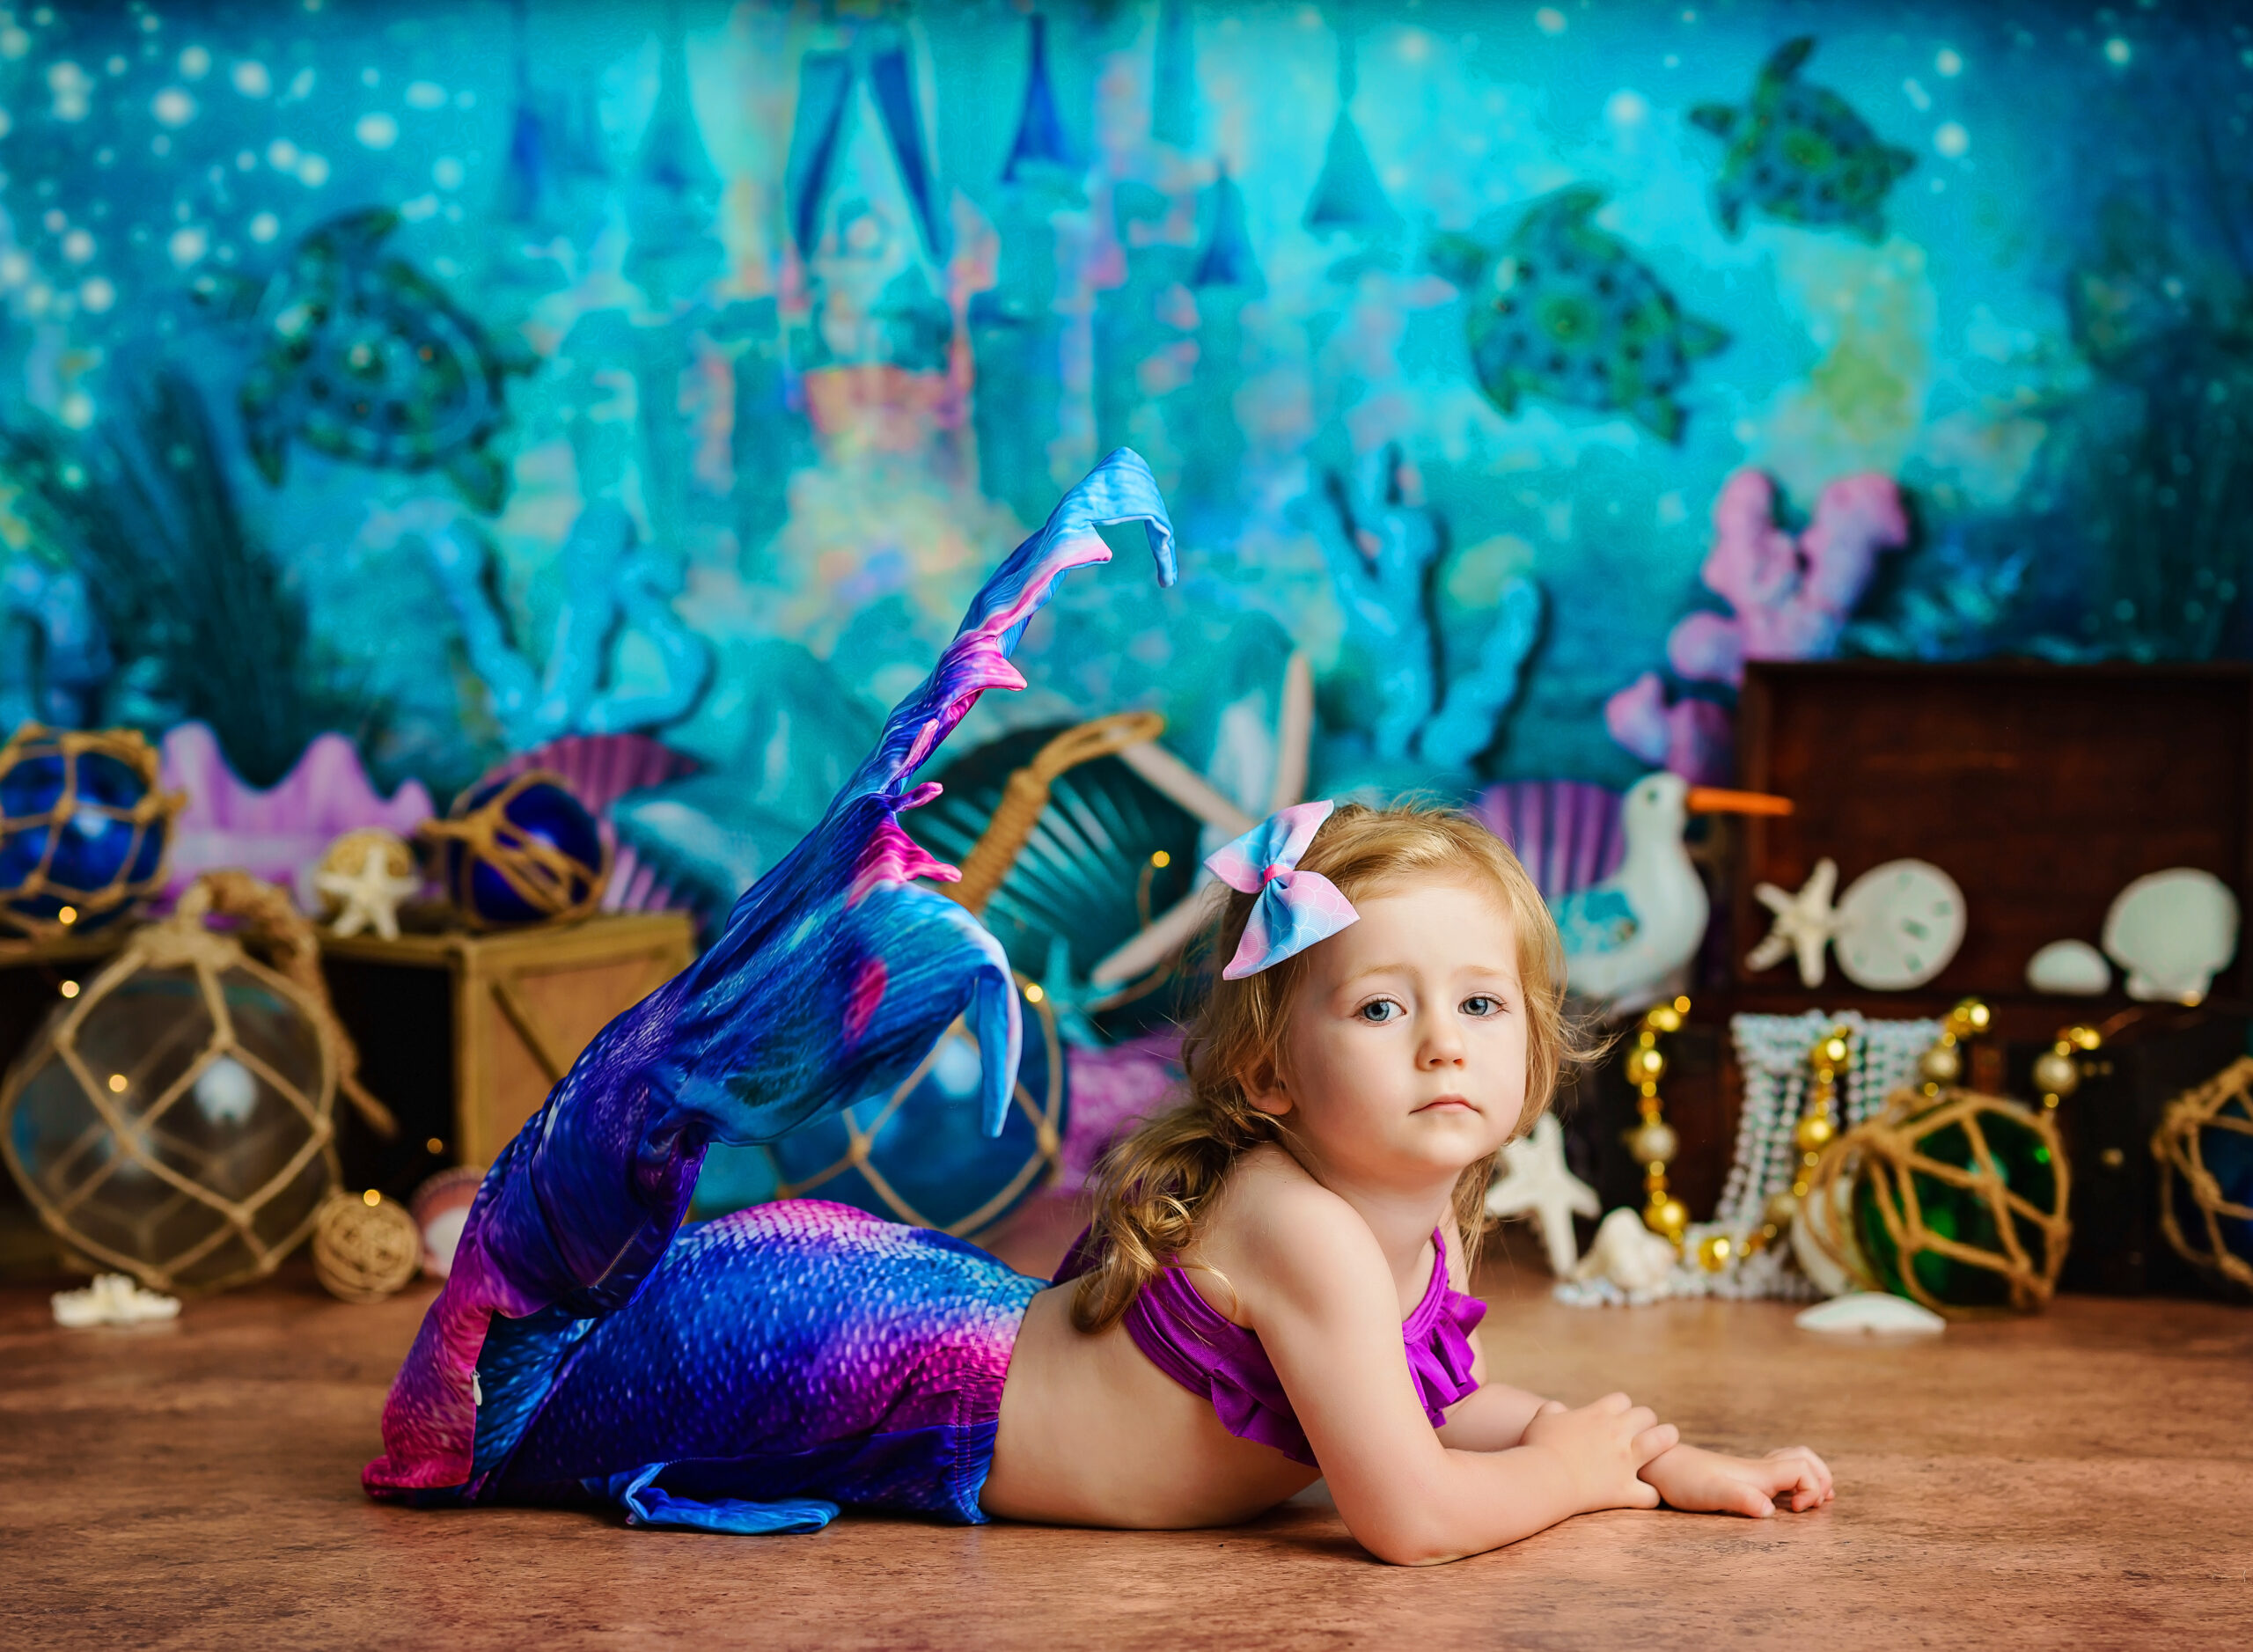 A little girl models a mermaid outfit while lying on her belly in a mermaid scene.